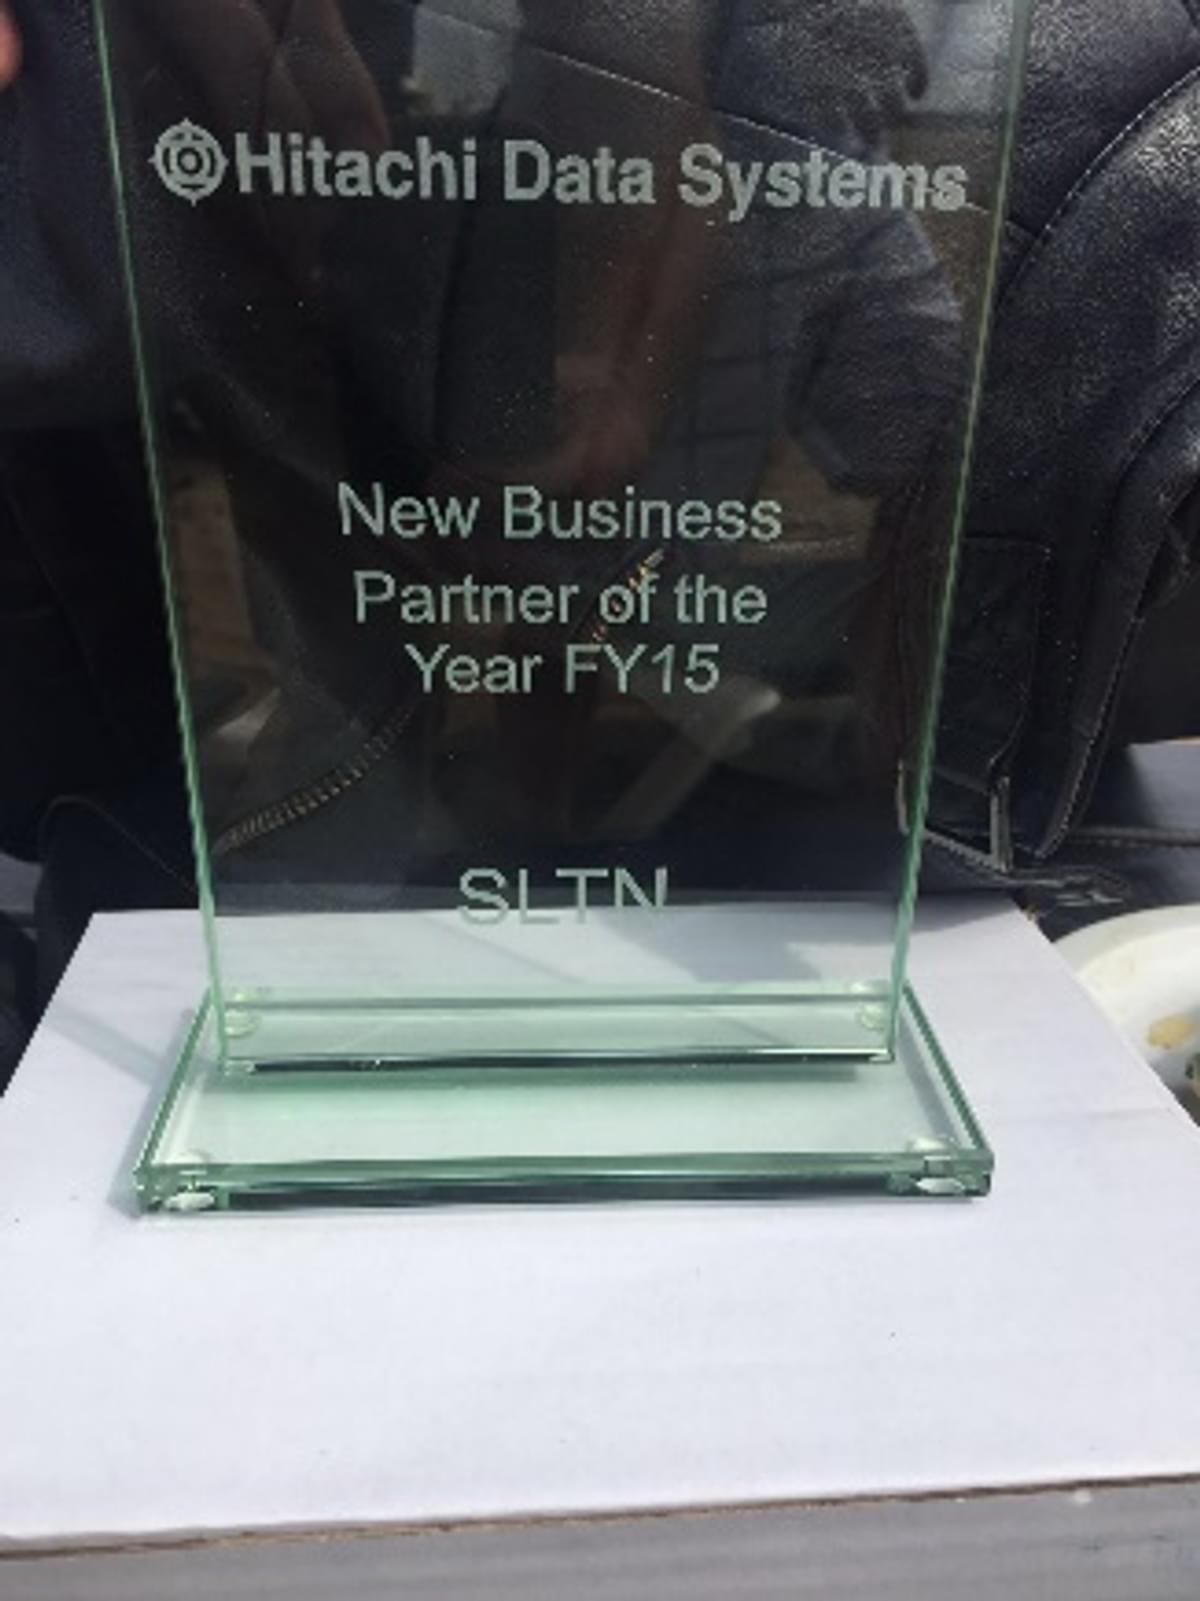 SLTN Inter Access is Hitachi Data Systems New Partner of the Year image